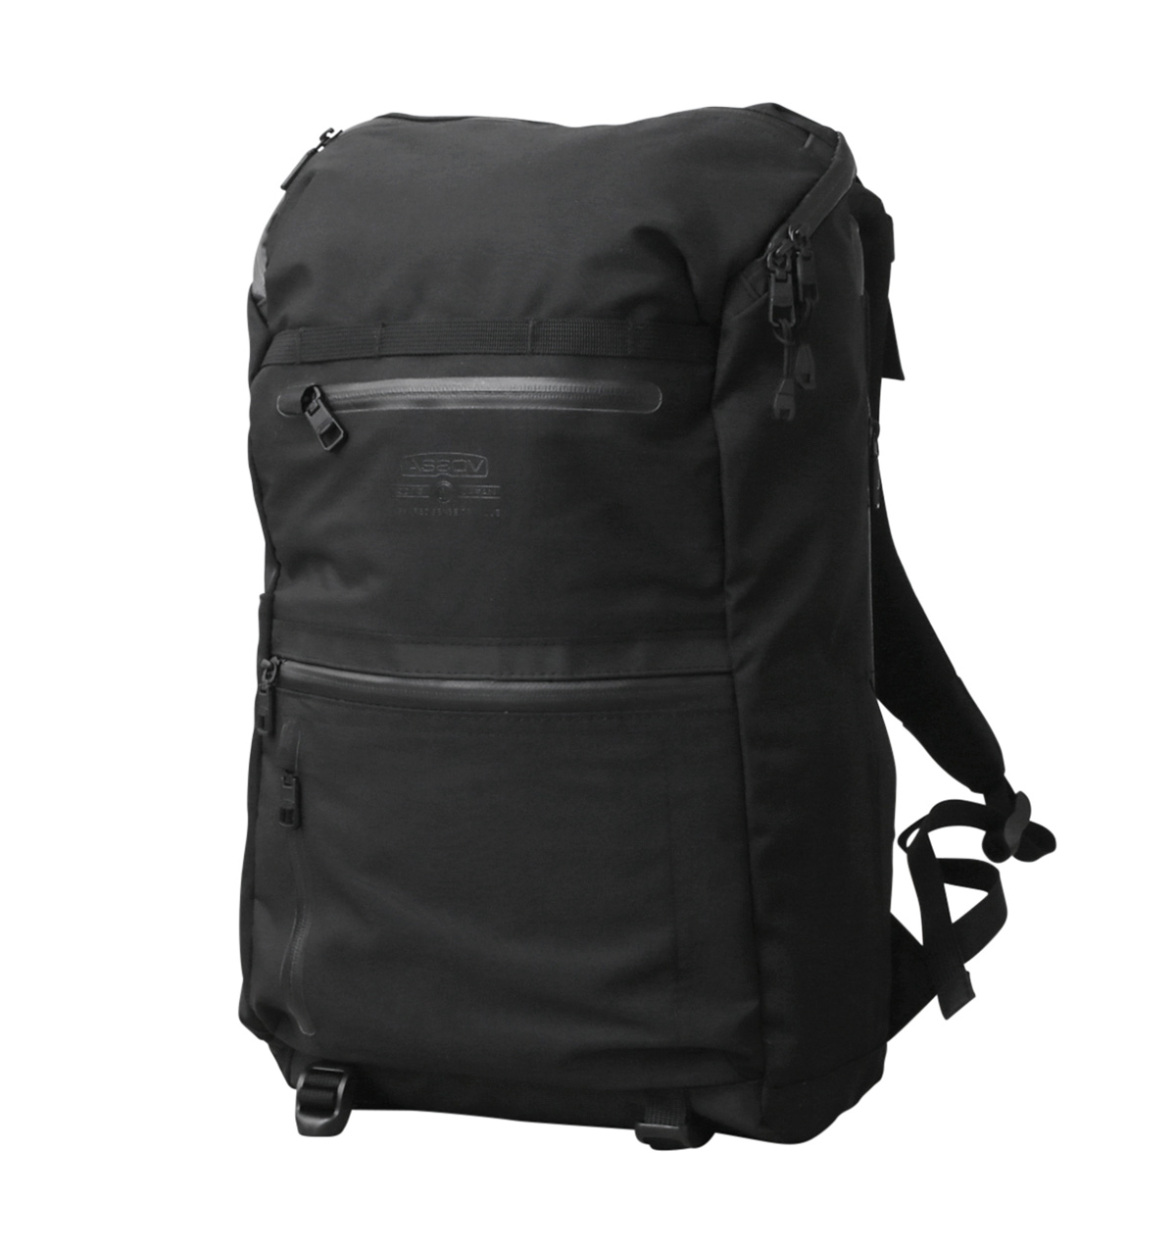 AS2OV アッソブ 141612 WATER PROOF CORDURA 305D ROUND ZIP BACKPACK バックパック /  リュックサック メンズ 通勤 通学【クーポン対象外】【T】